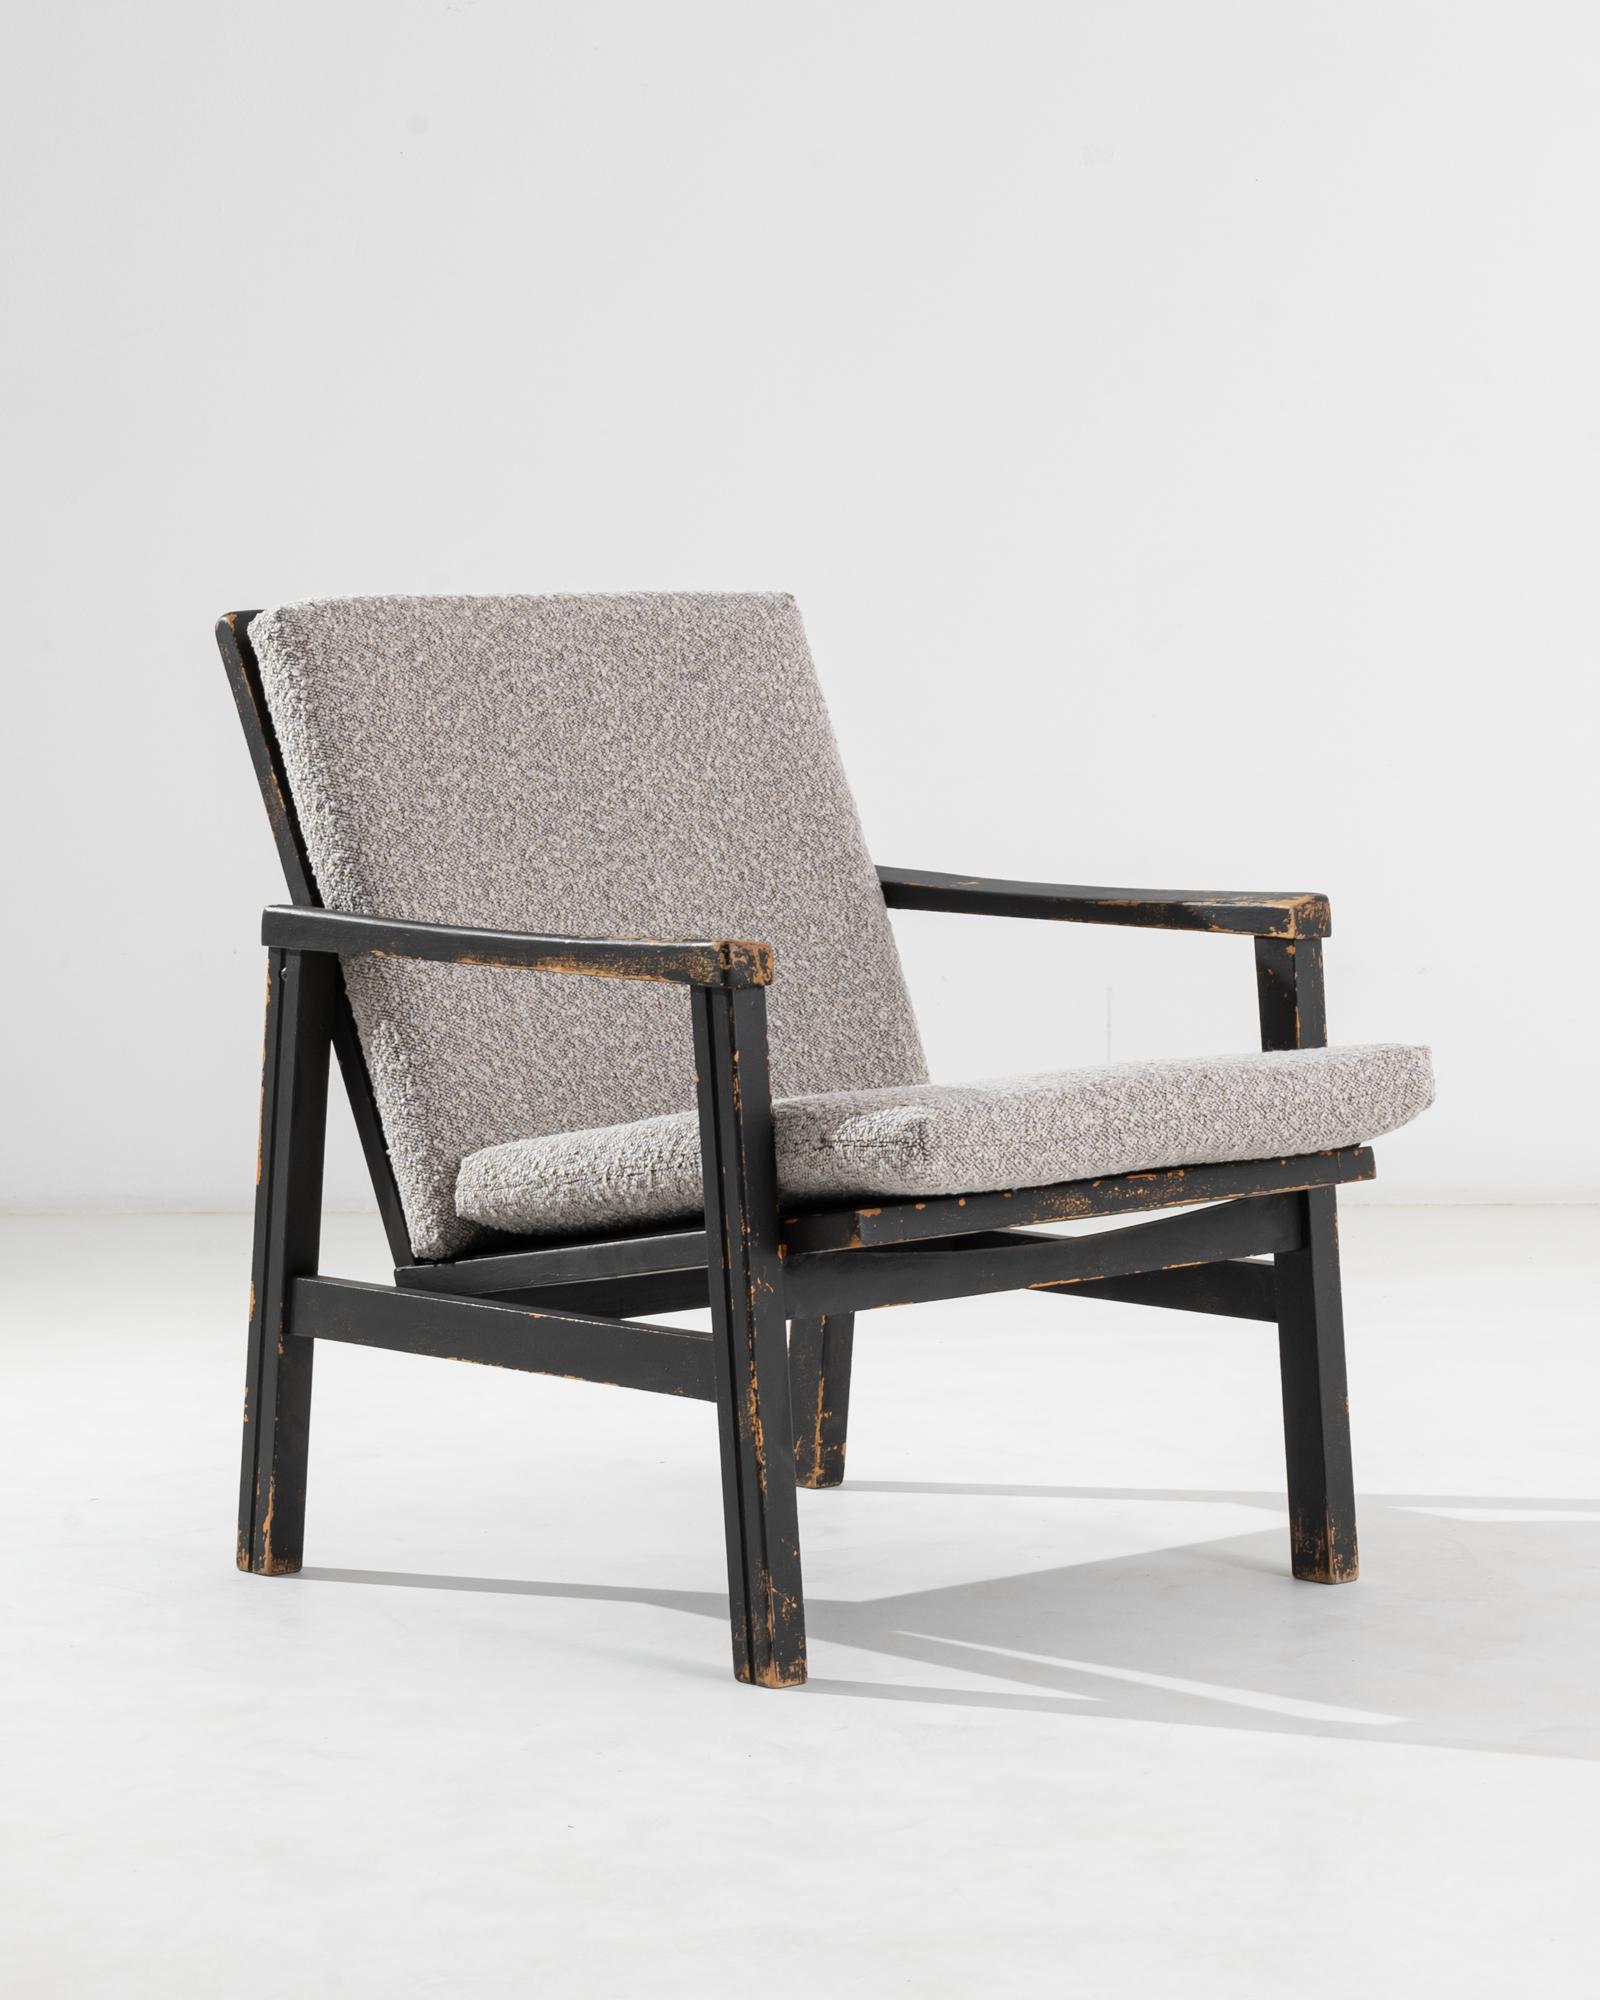 This vintage Mid-century Modern armchair offers a bold, eye-catching design in soothing natural materials. Made in France in the 20th century, the wooden frame is lightweight yet packs a graphic punch. A-frame legs support a ‘floating’ seat, set at